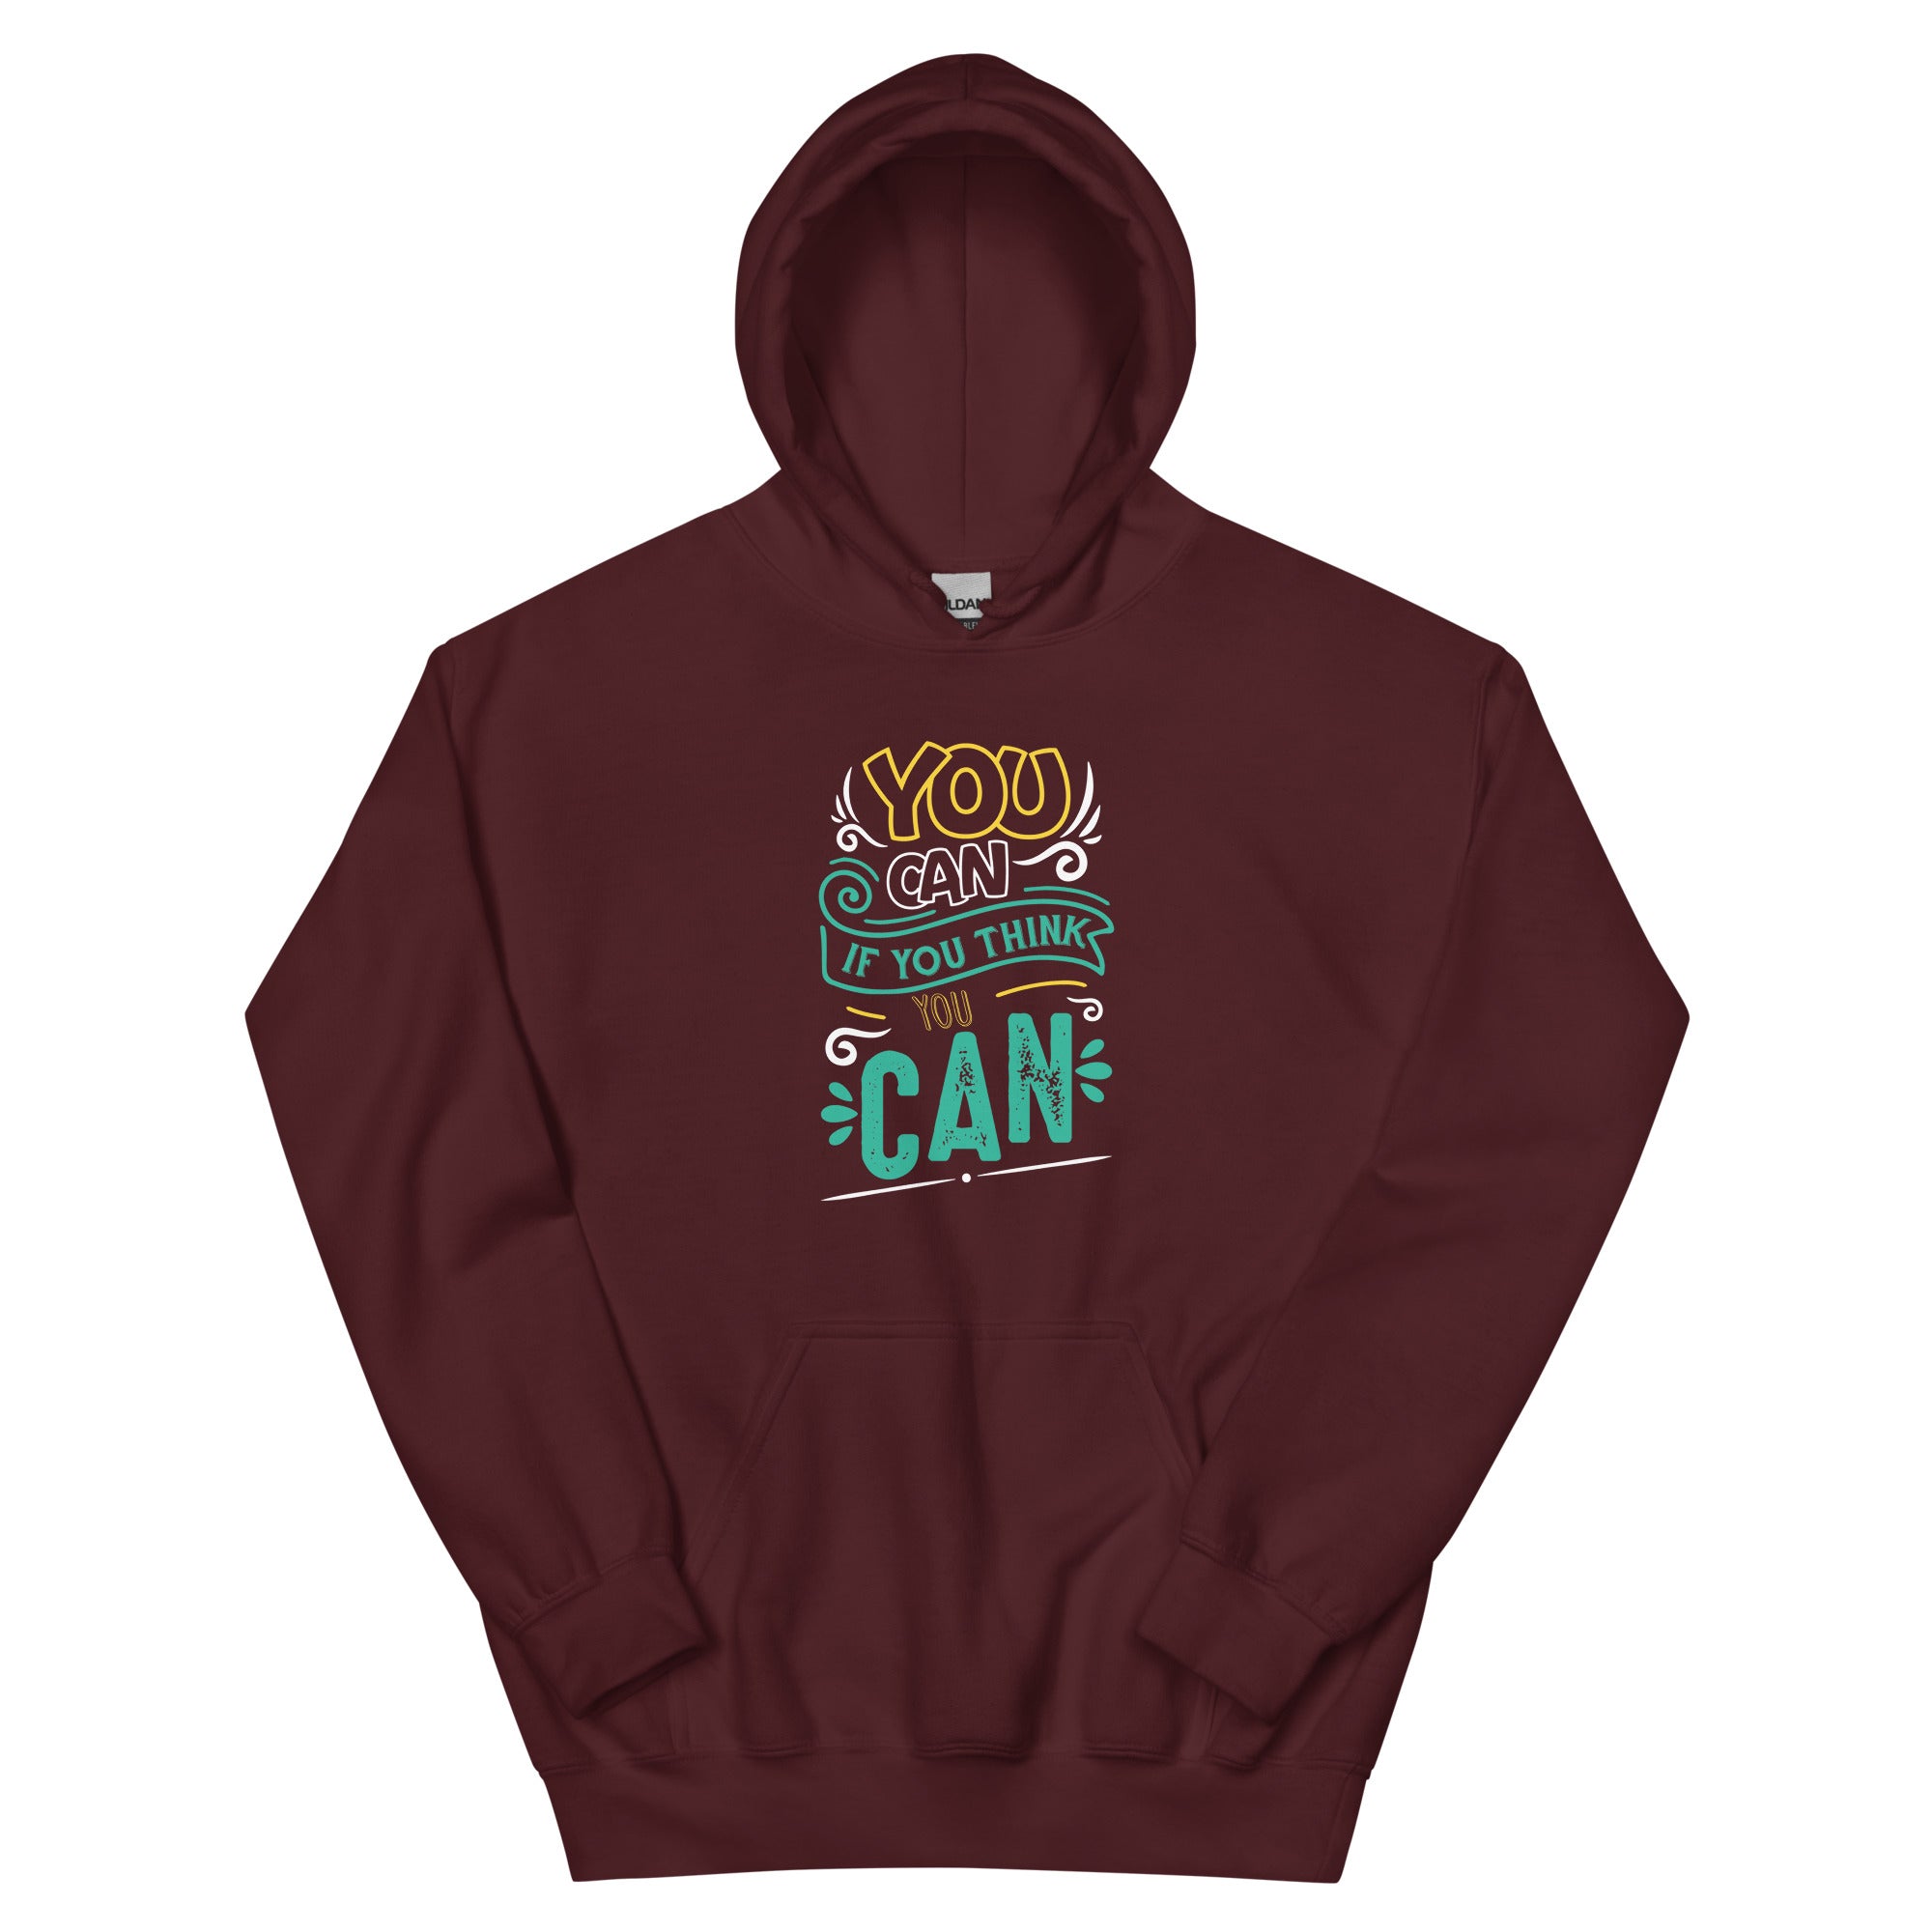 You Can, If You Think You Can - Unisex Hoodie